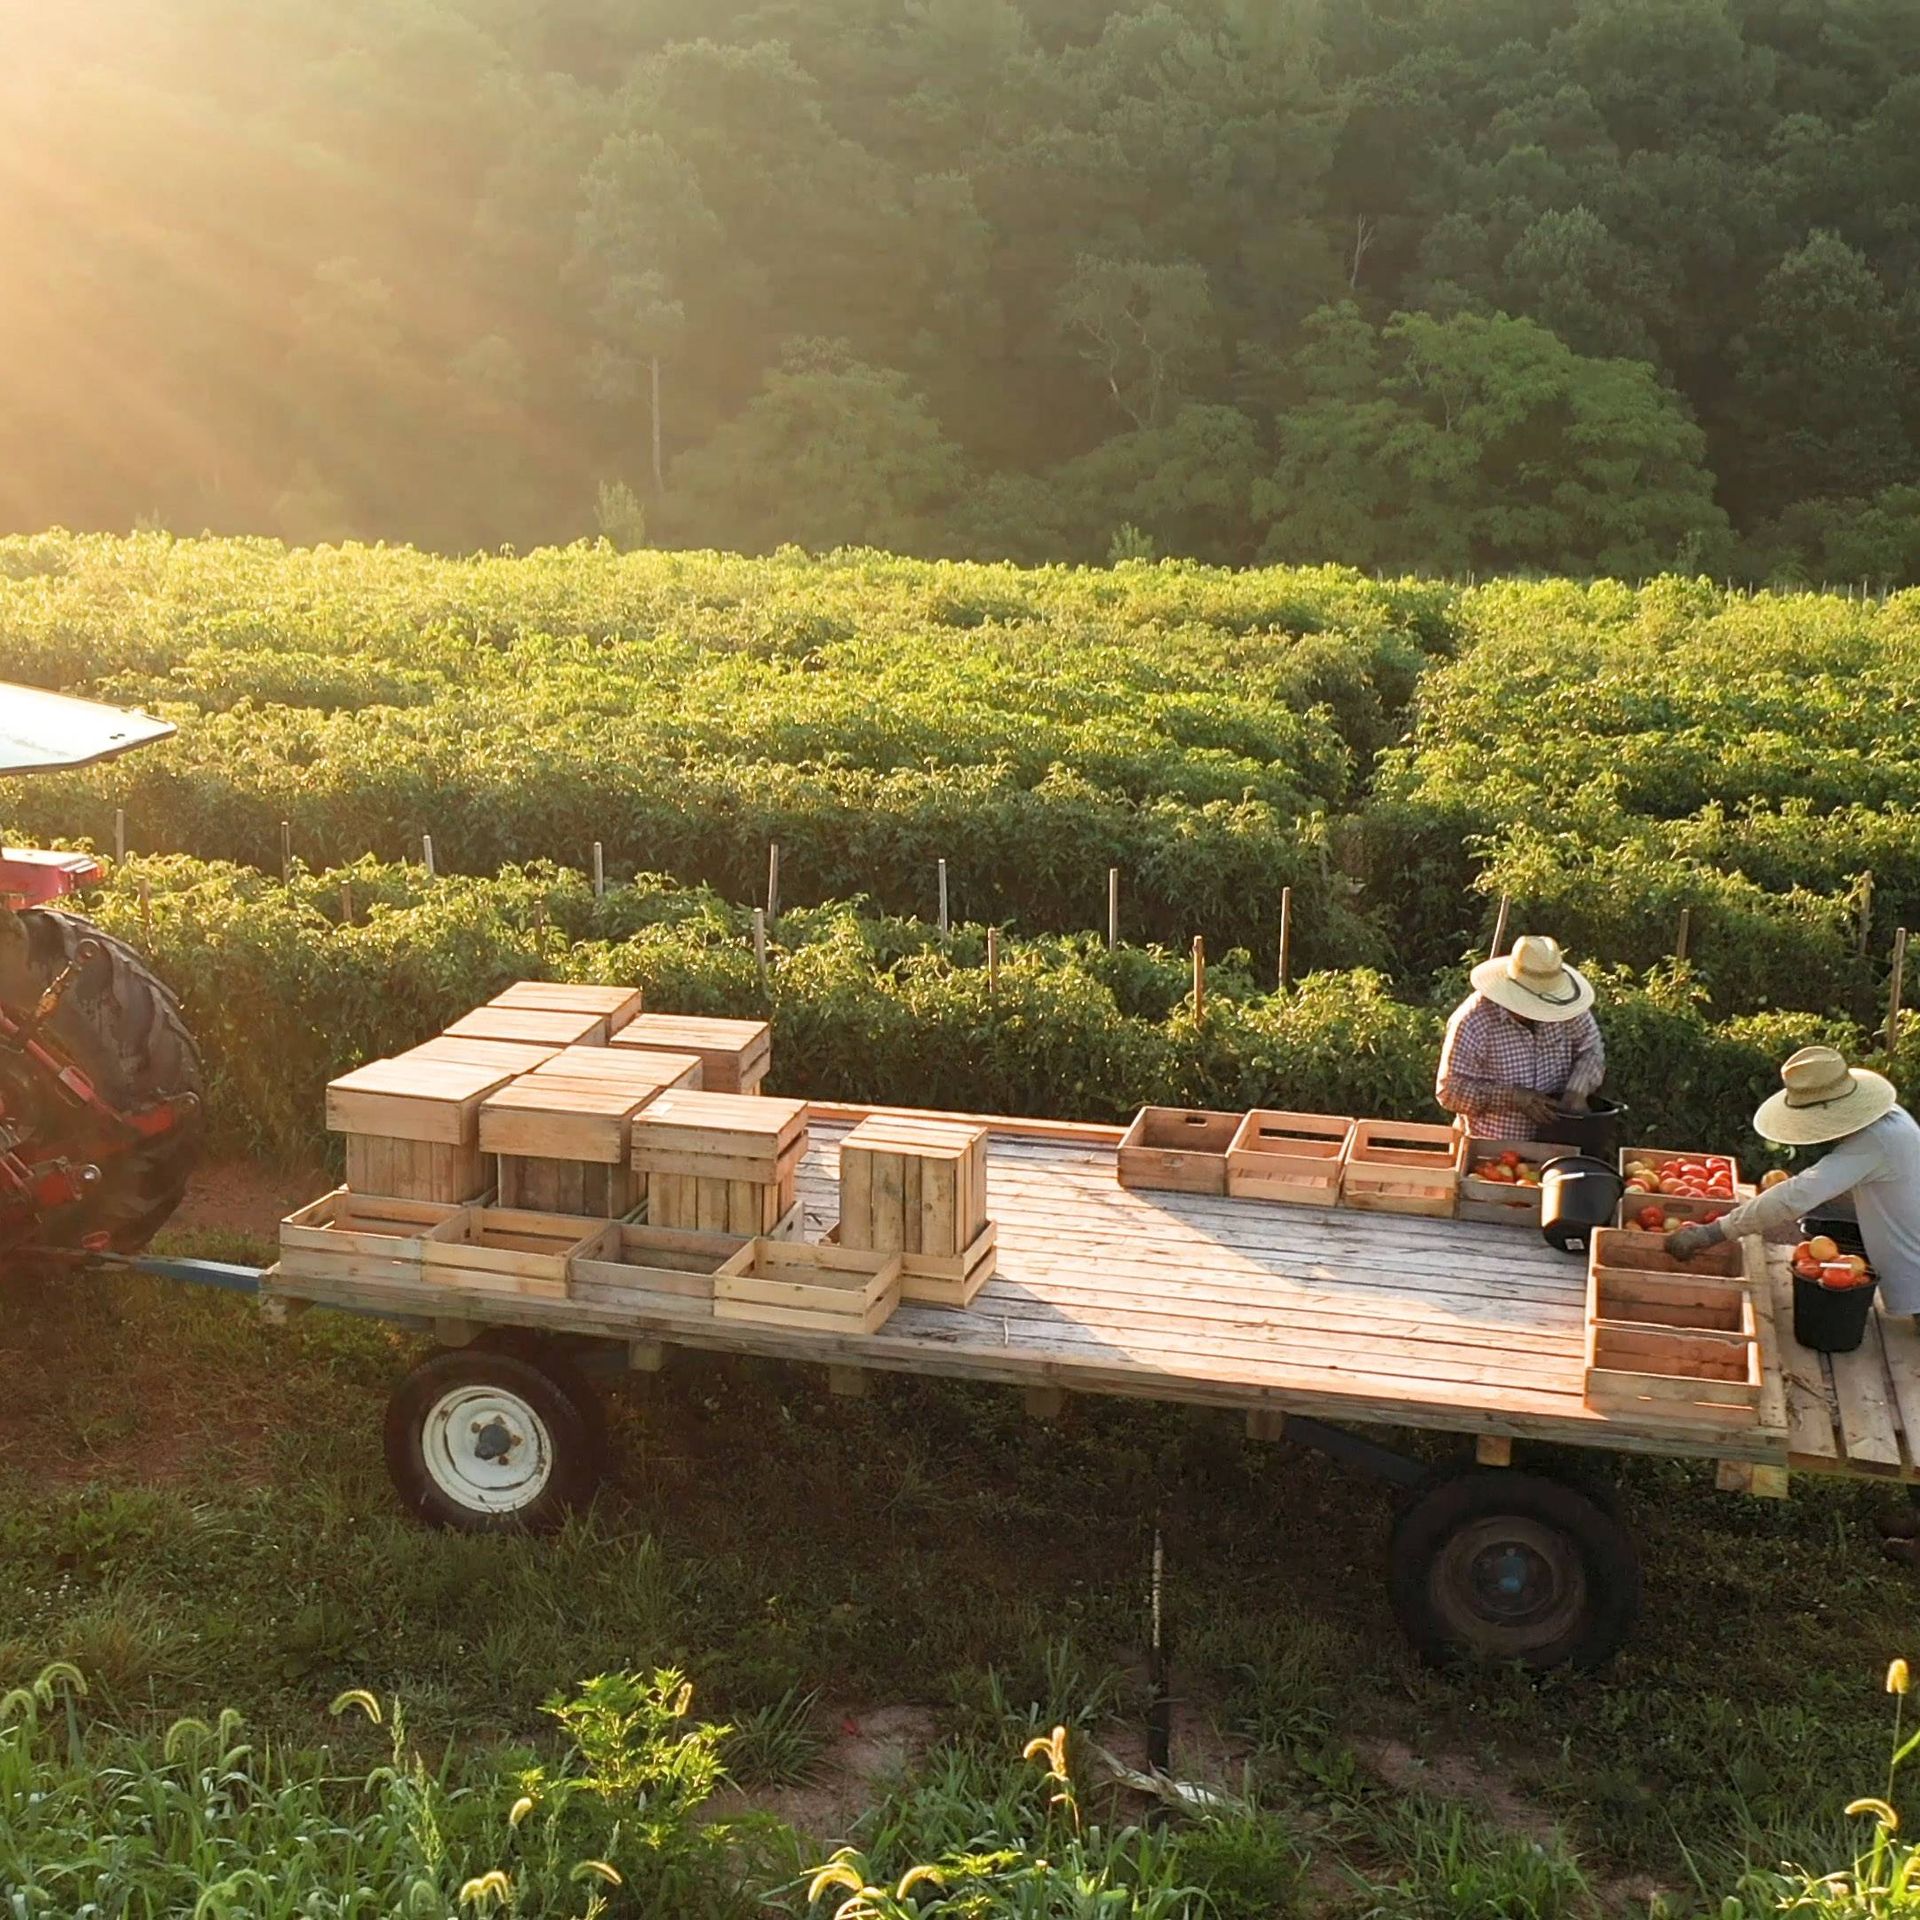 Image of two workers loading fresh produce onto a trailer after harvest